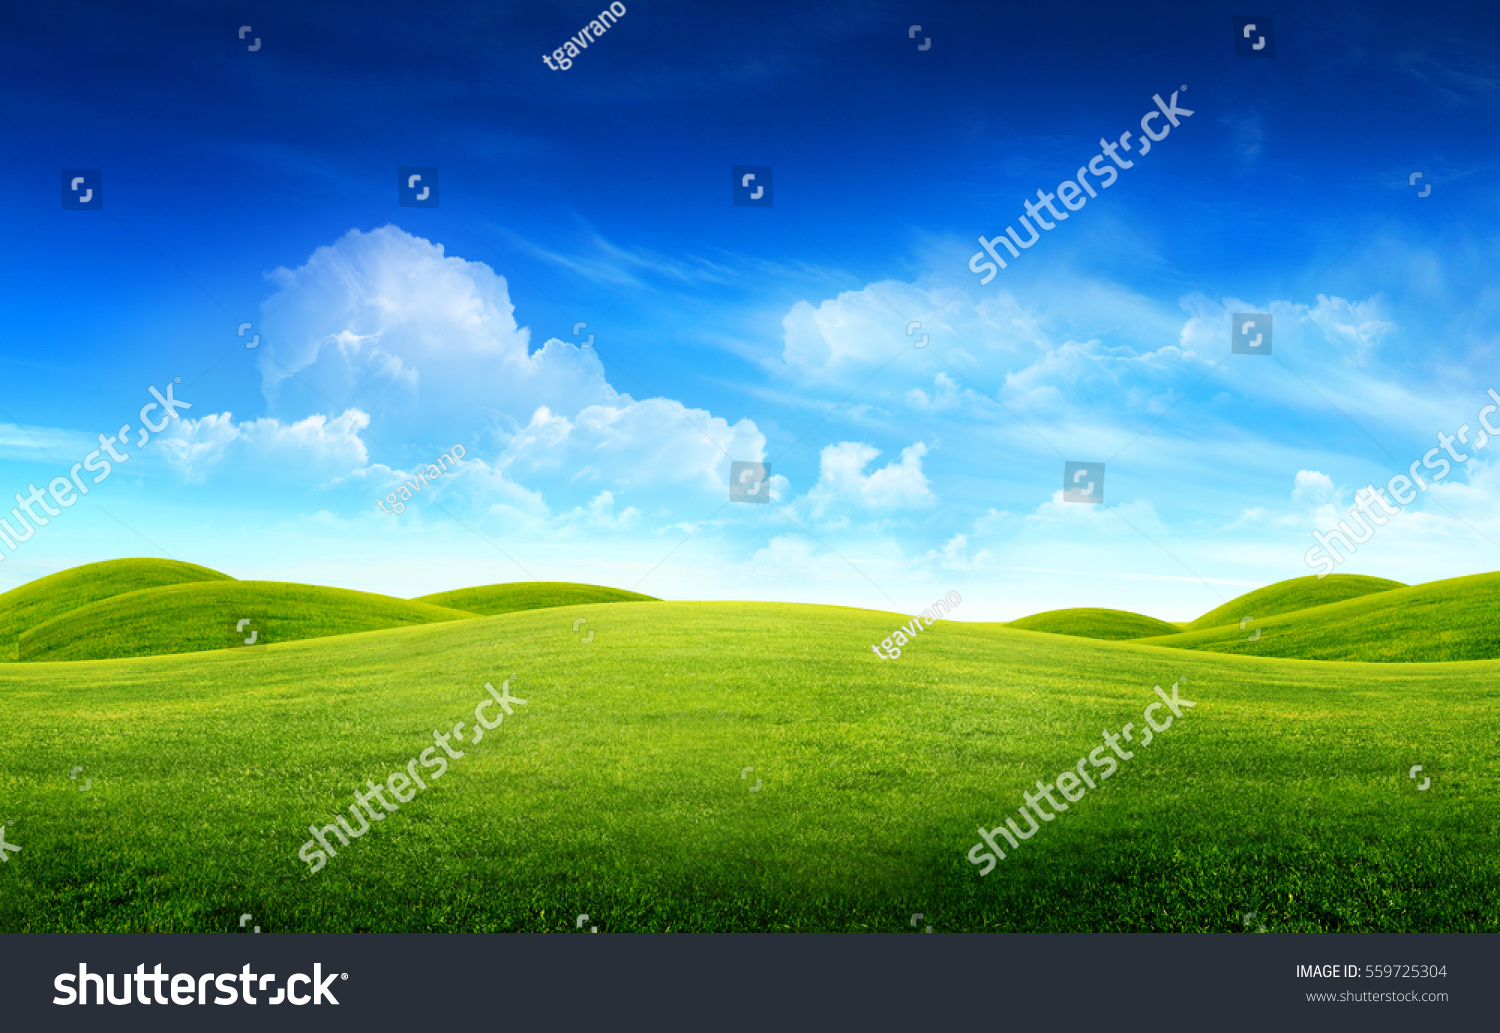 Green grass field on small hills and blue sky with clouds #559725304